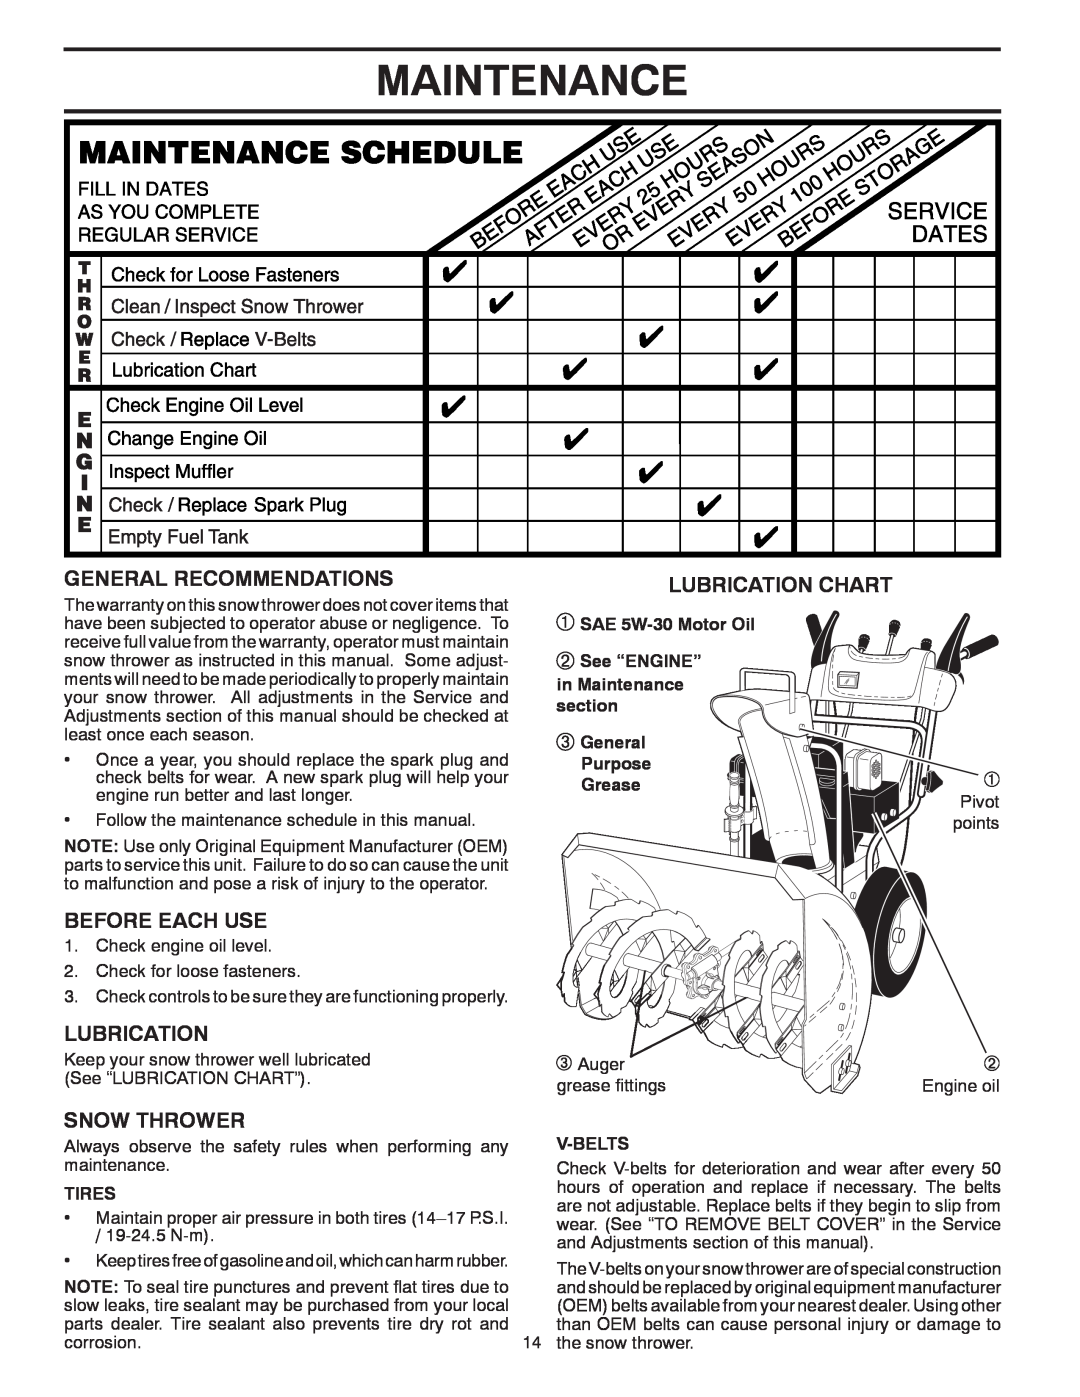 Poulan 414949 Maintenance, General Recommendations, Before Each Use, Lubrication Chart, Snow Thrower, Purpose Grease 